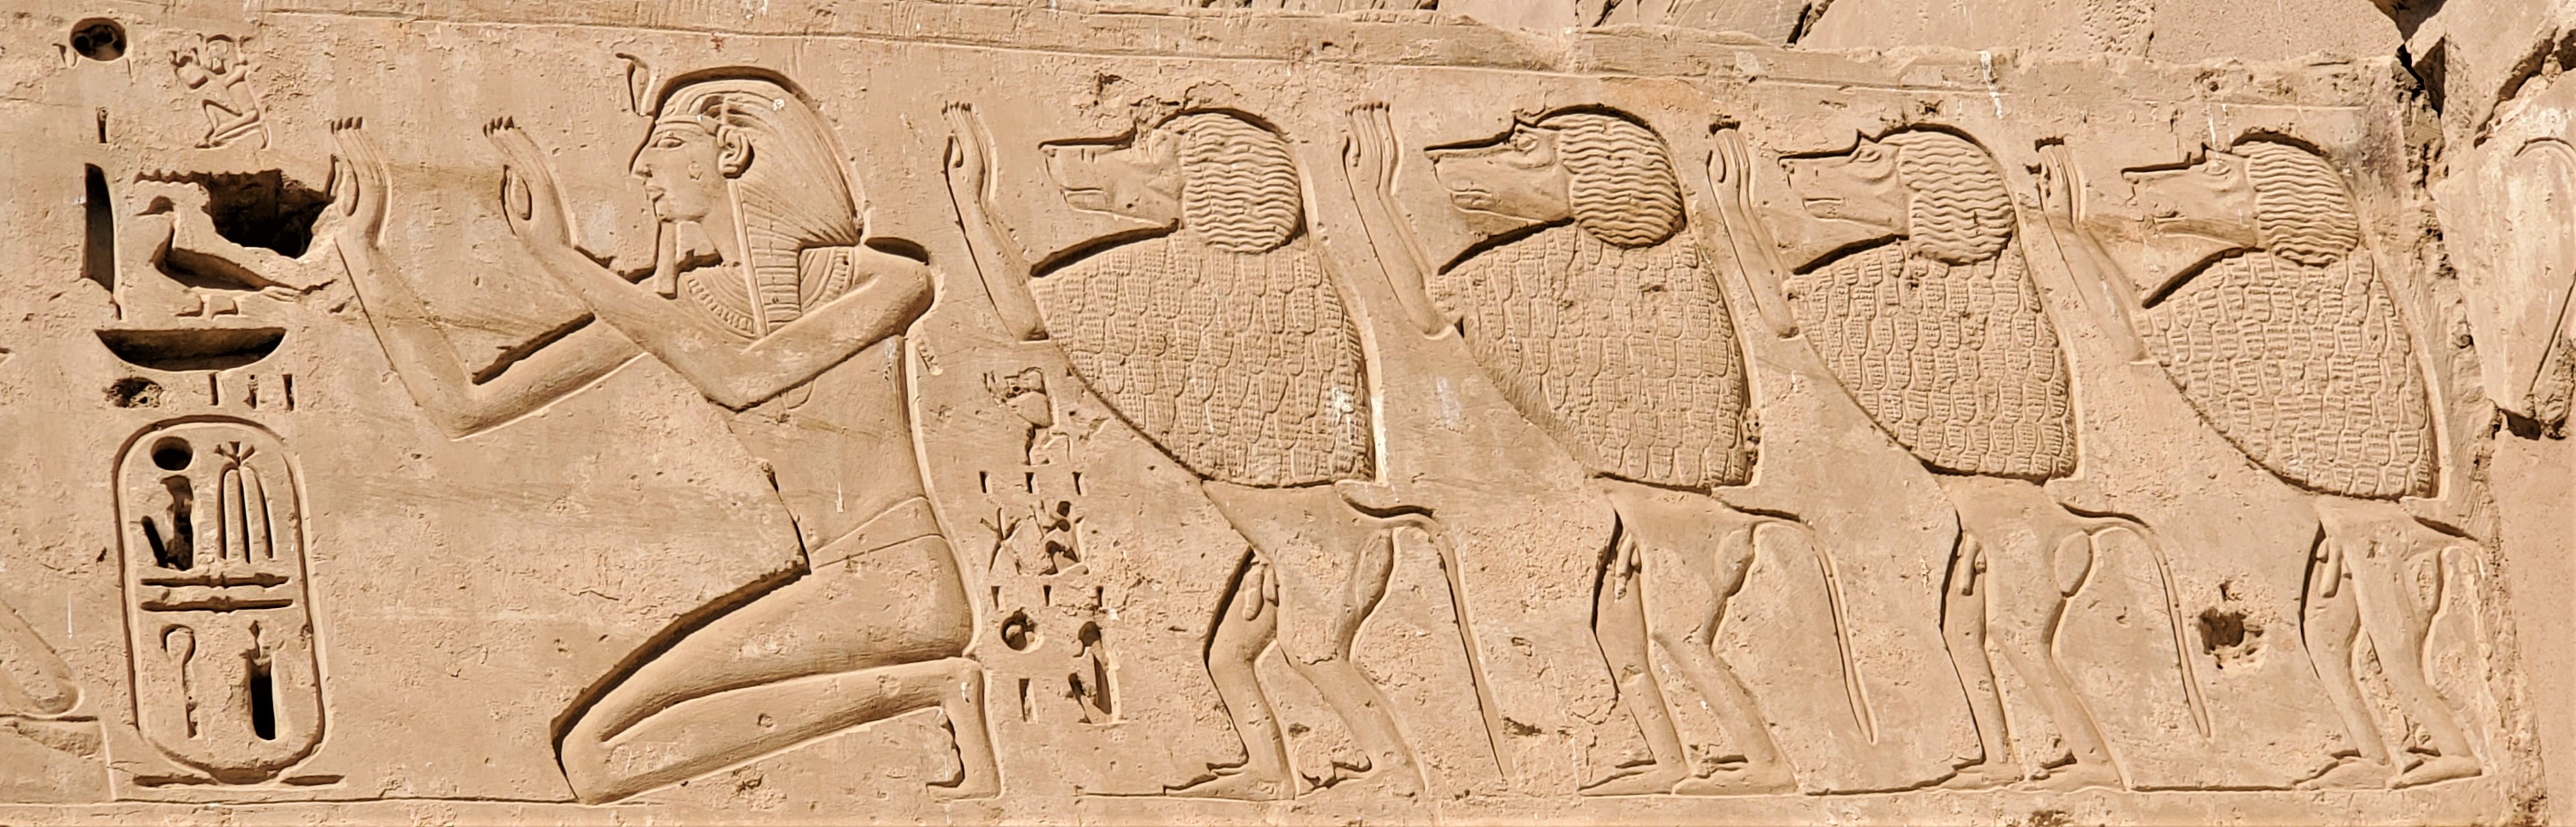 wall carving of baboons